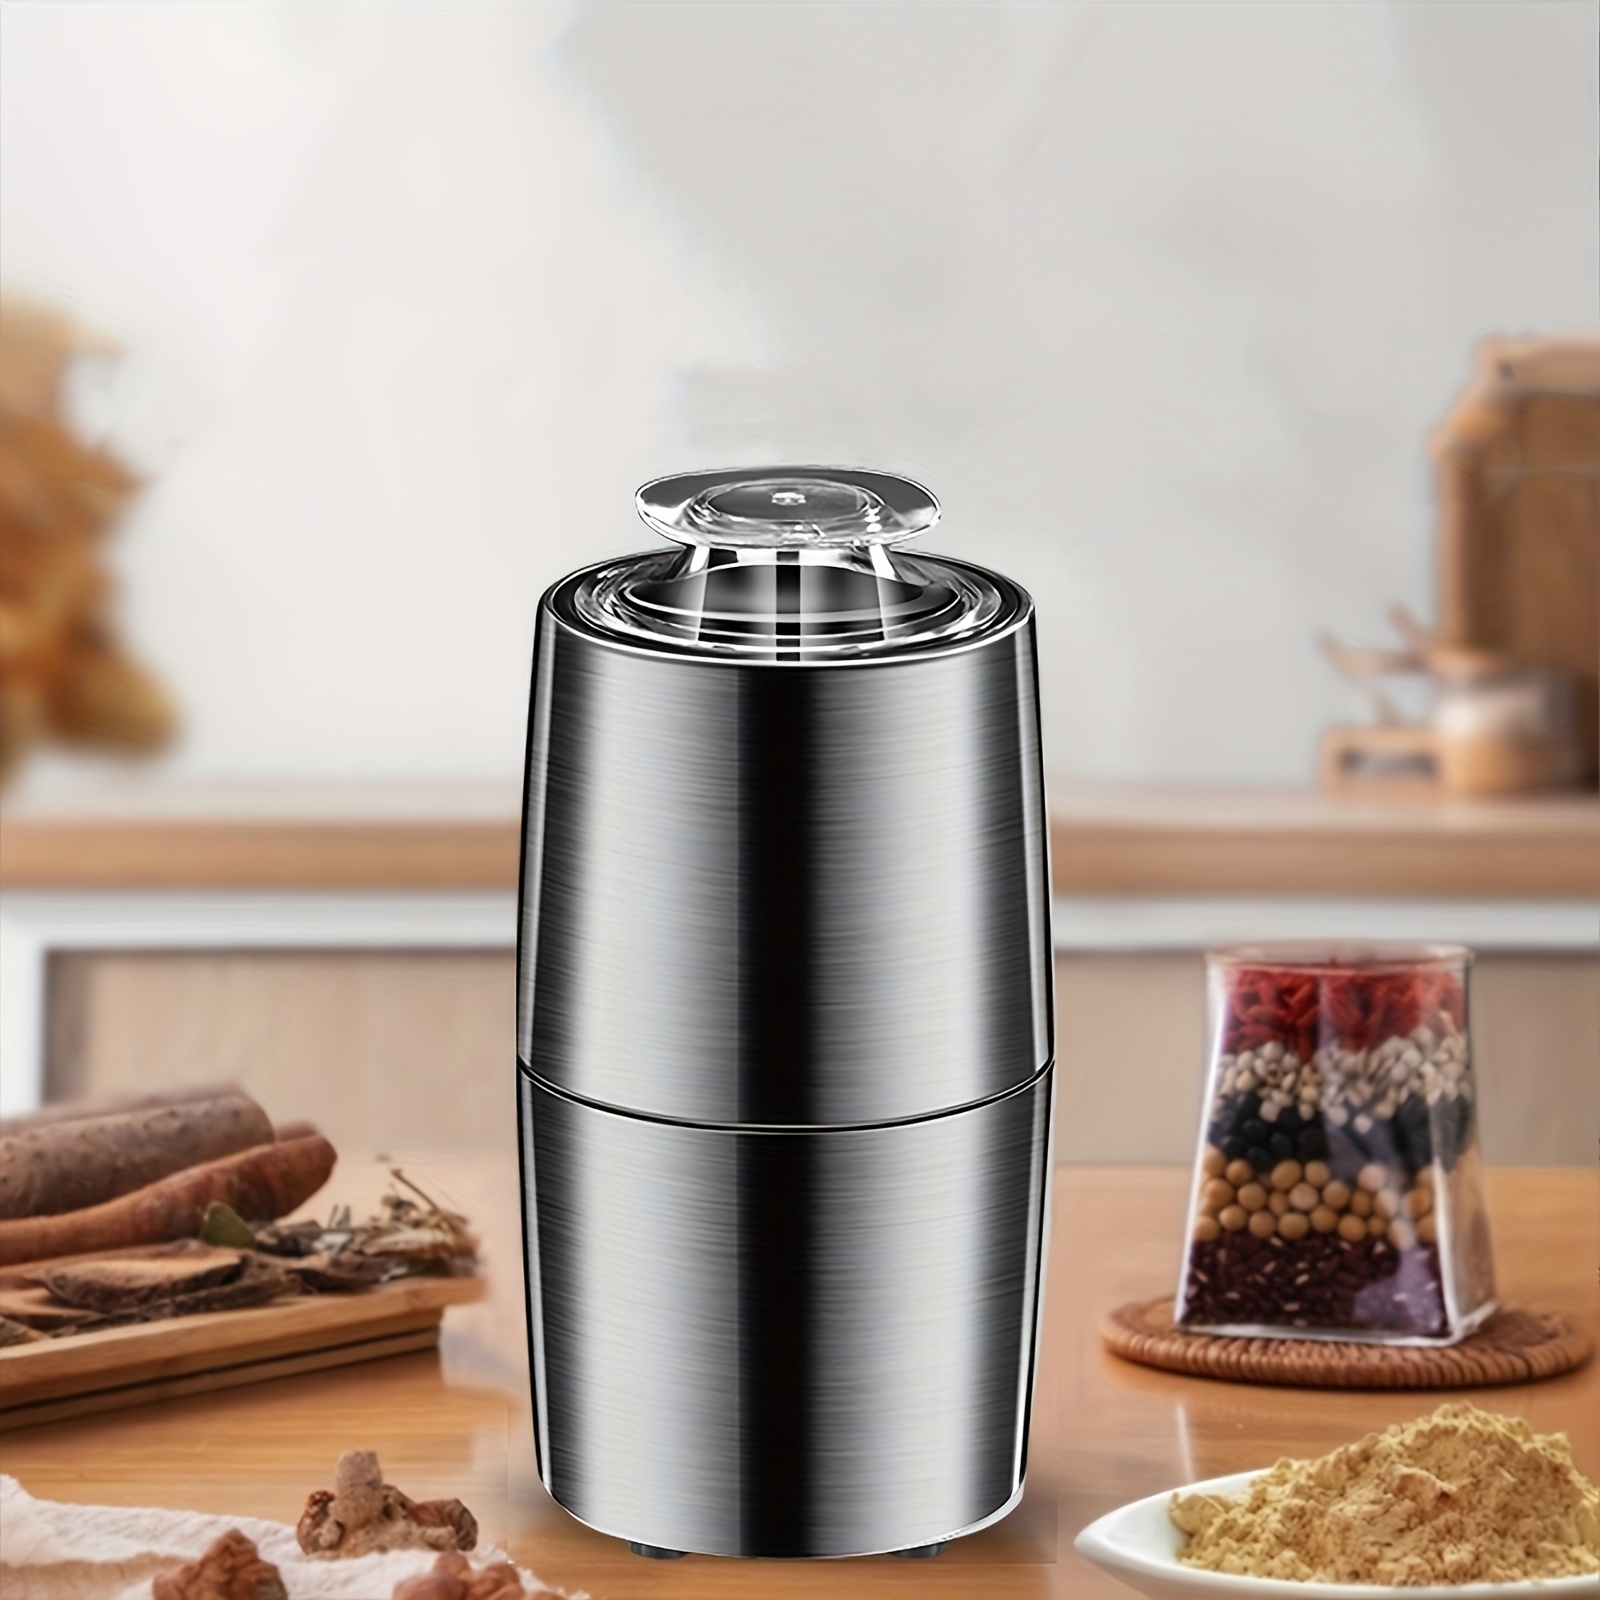 Stainless Steel Electric Nut Grinder